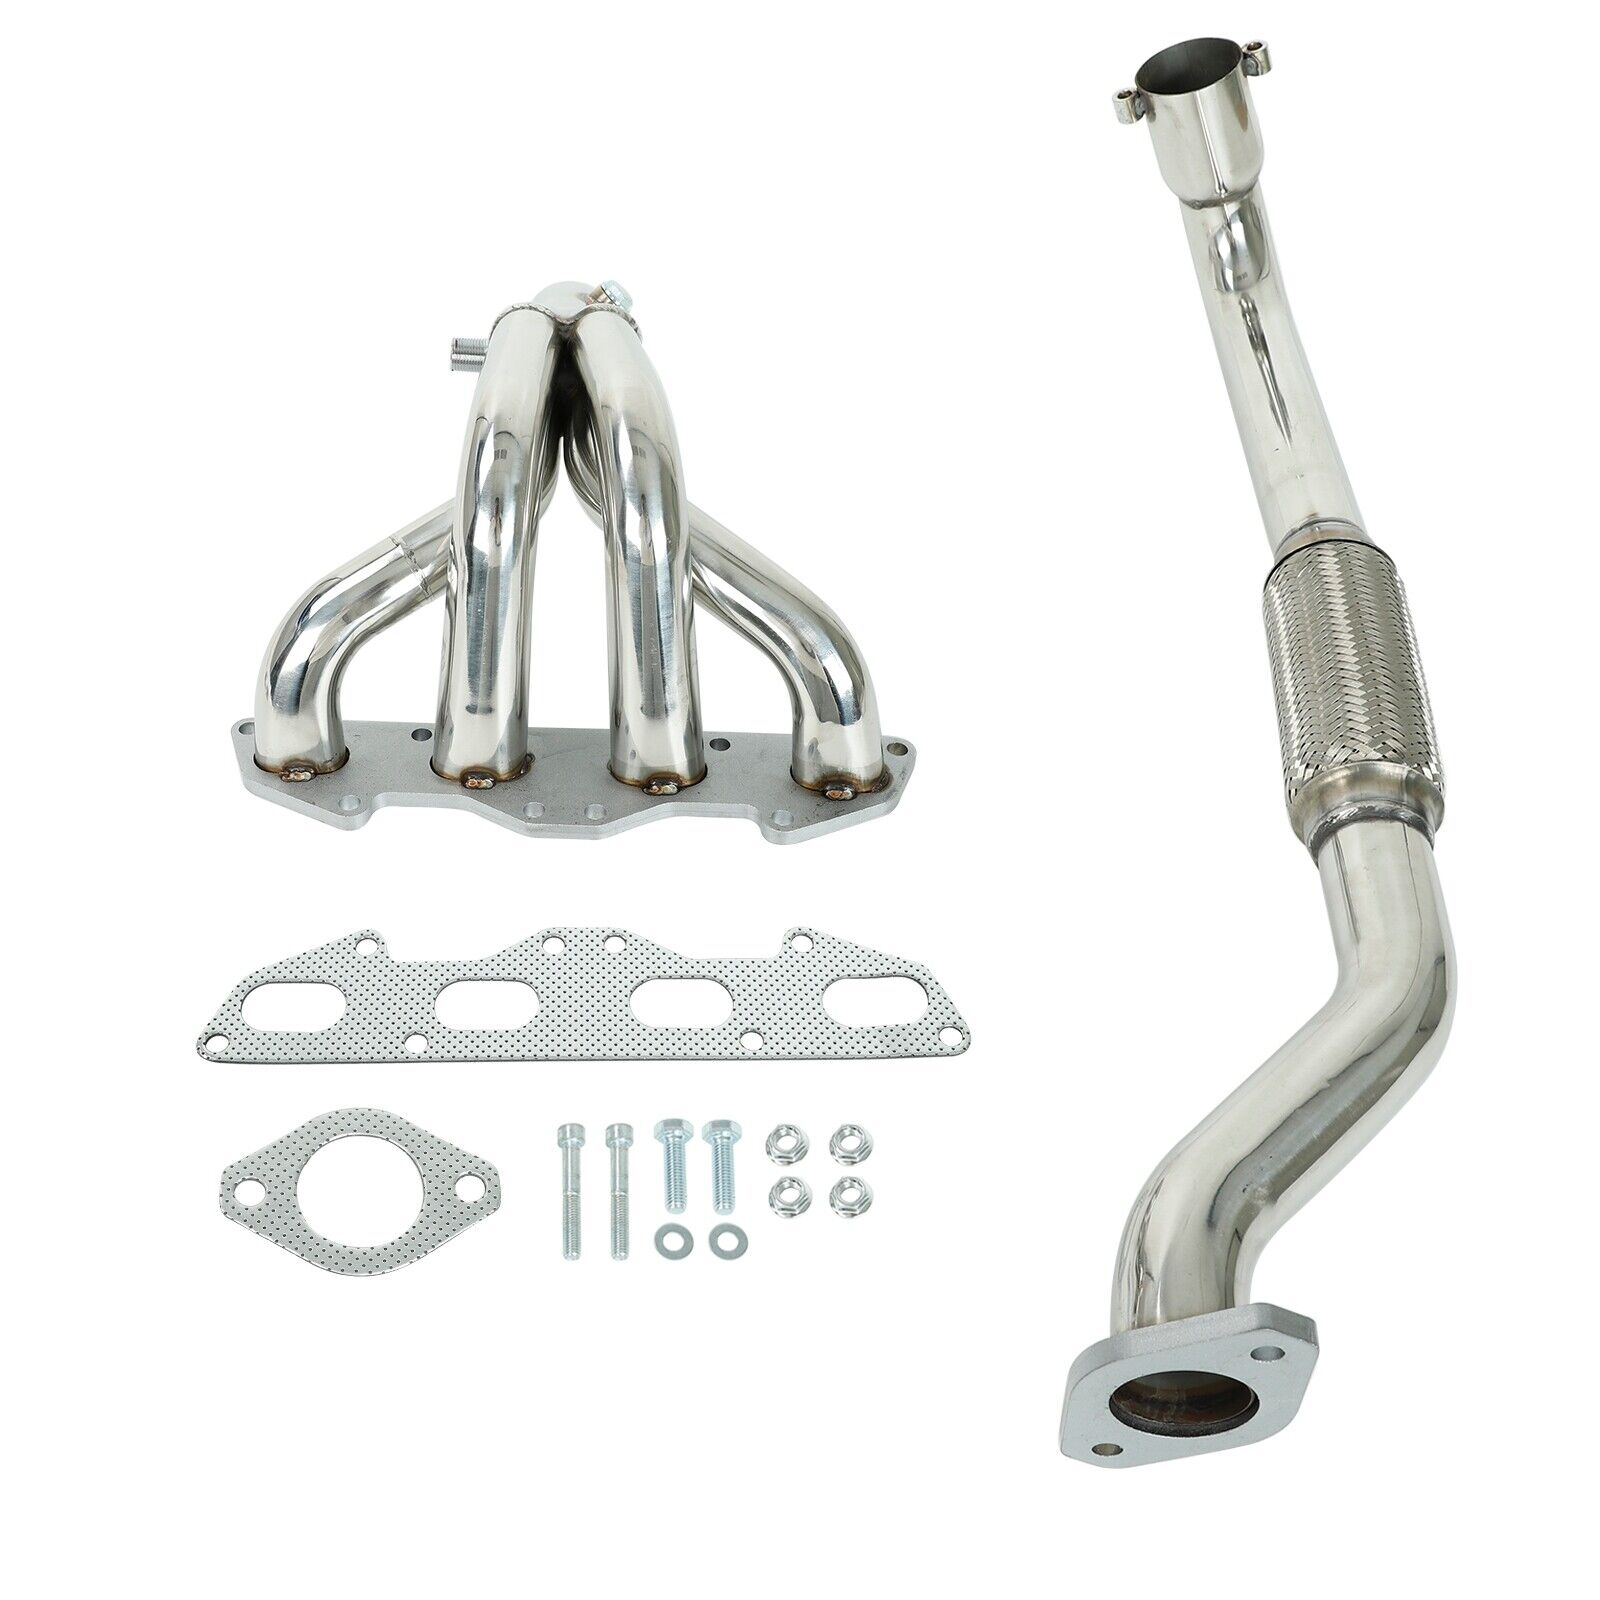 Exhaust Header Stainless Steel Fits Mitsubishi Eclipse 2.0 95-99 1995-1999 2.0L